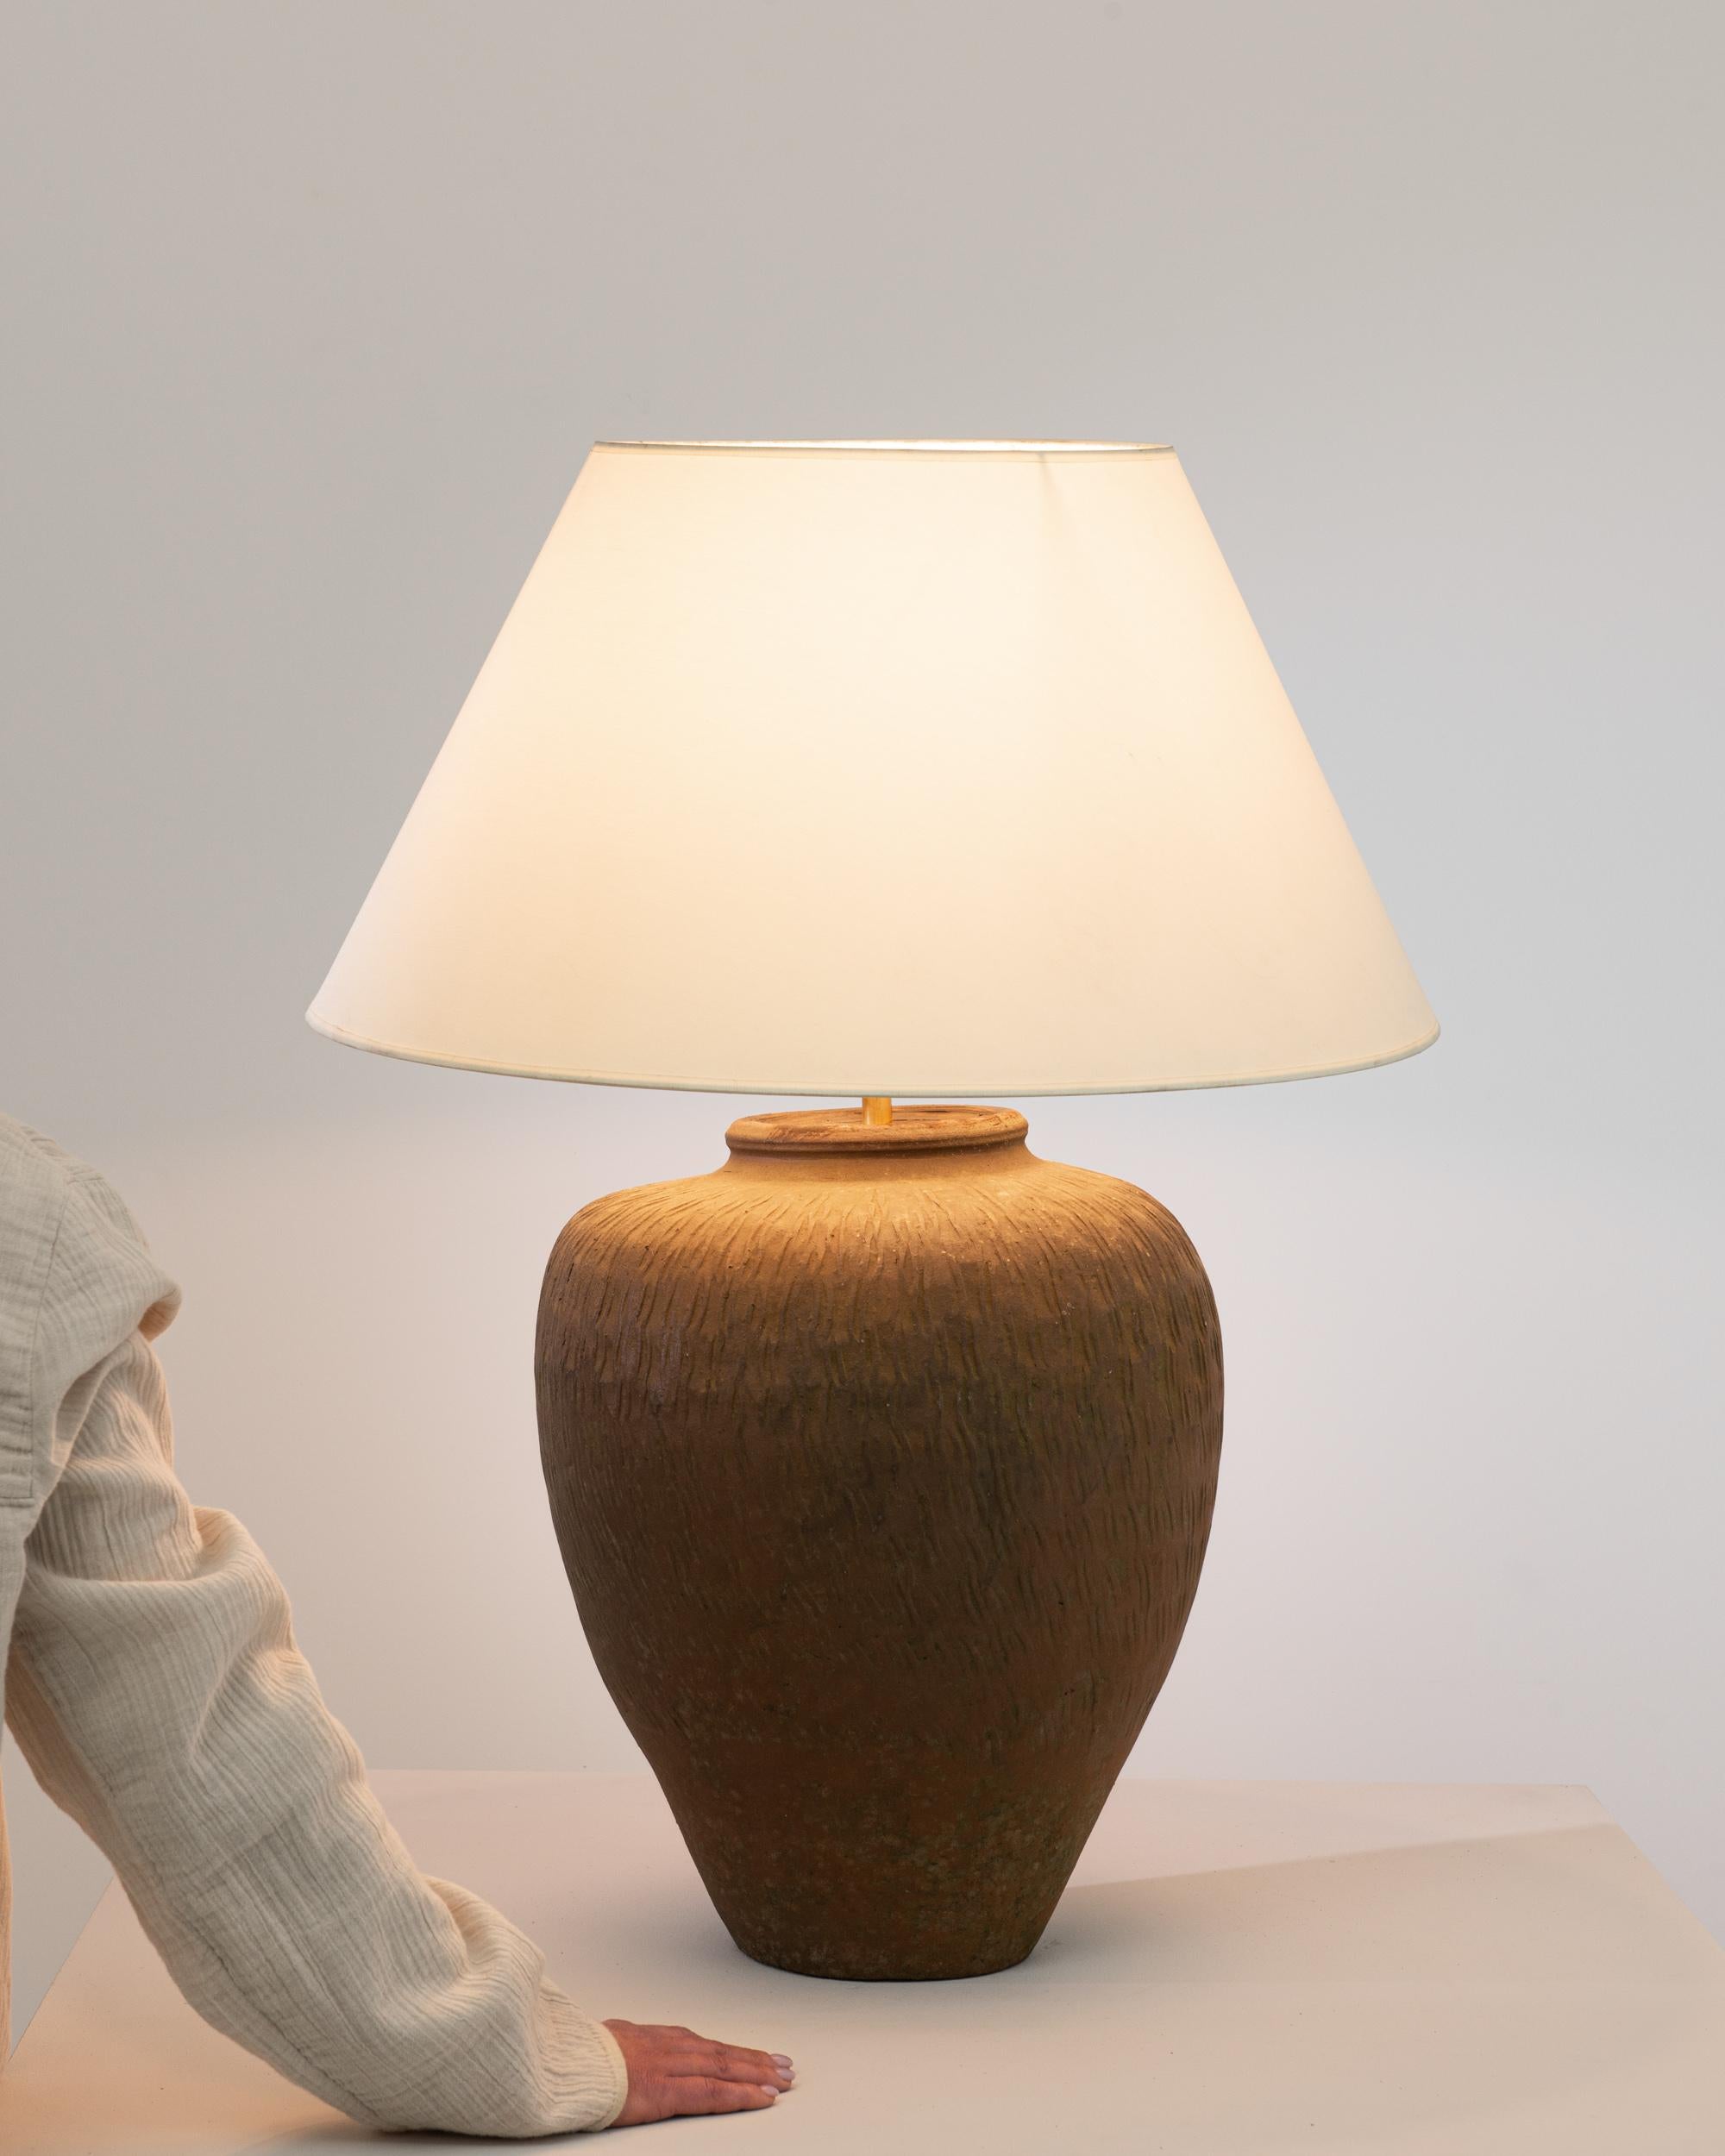 Early 20th Century Vintage Chinese Ceramic Vase Table Lamp